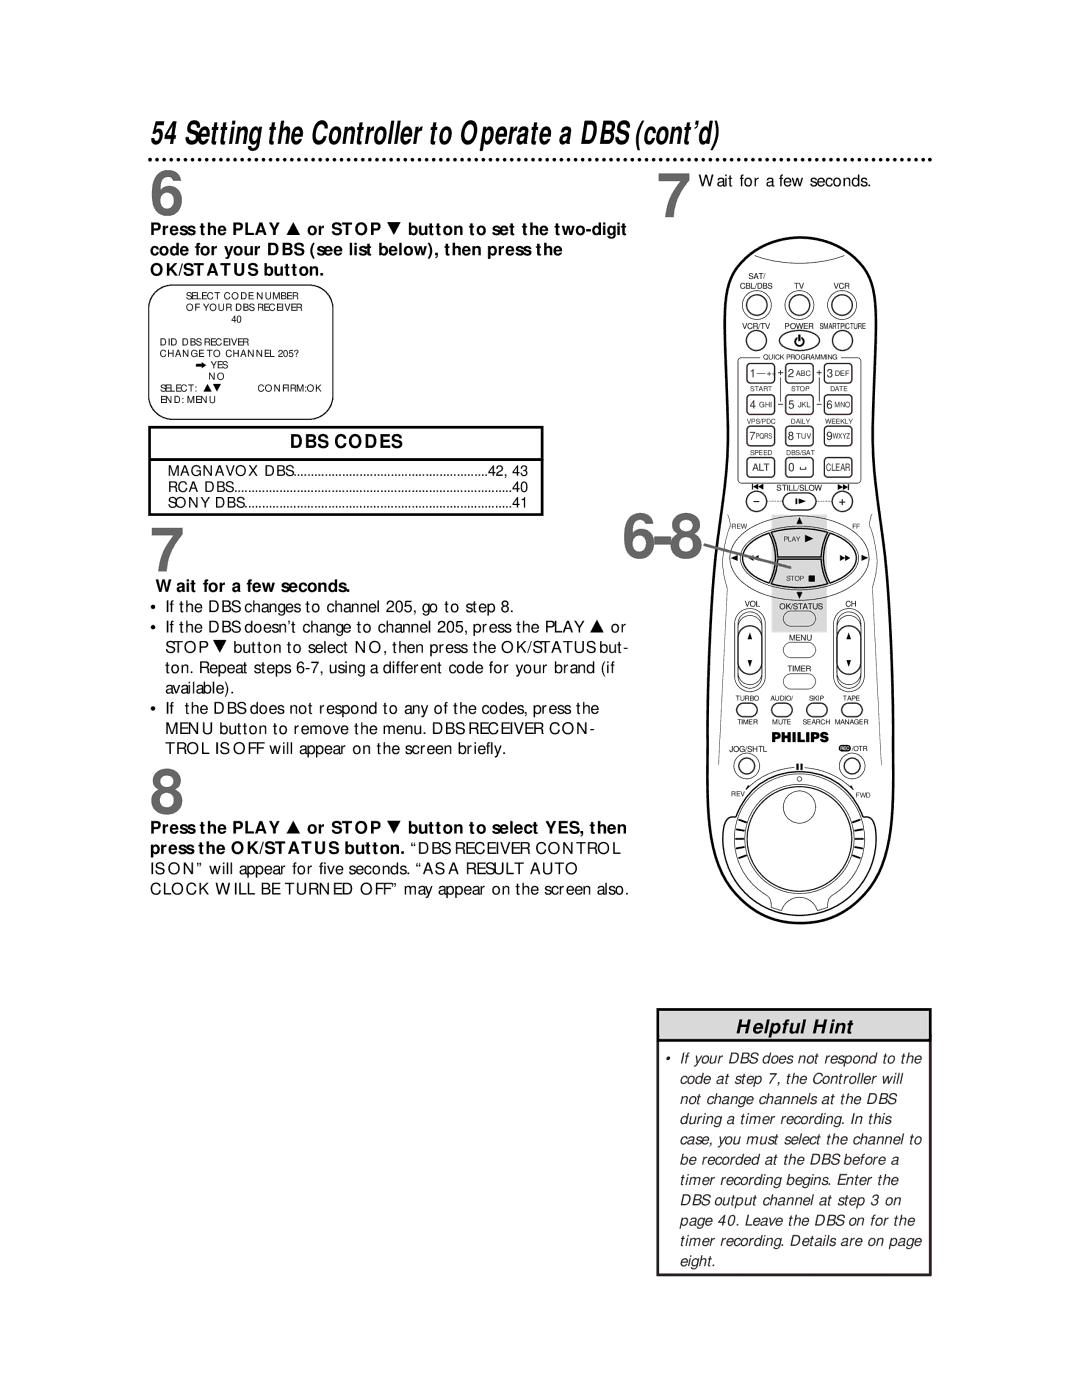 Philips VR810BPH owner manual Setting the Controller to Operate a DBS cont’d, 7Wait for a few seconds 